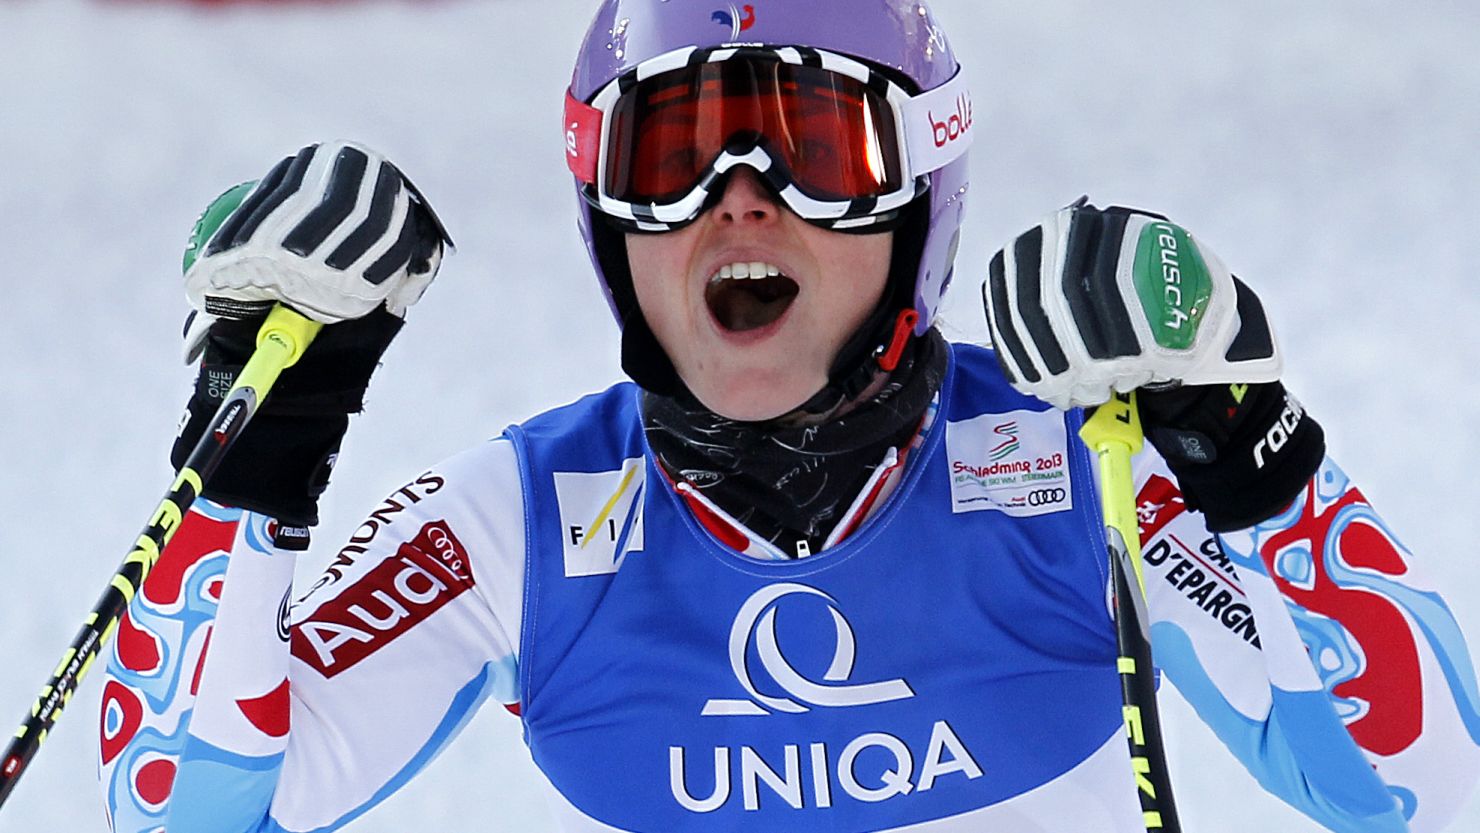 France's Tessa Worley skis to the European nation's fourth medal of the World Championships.